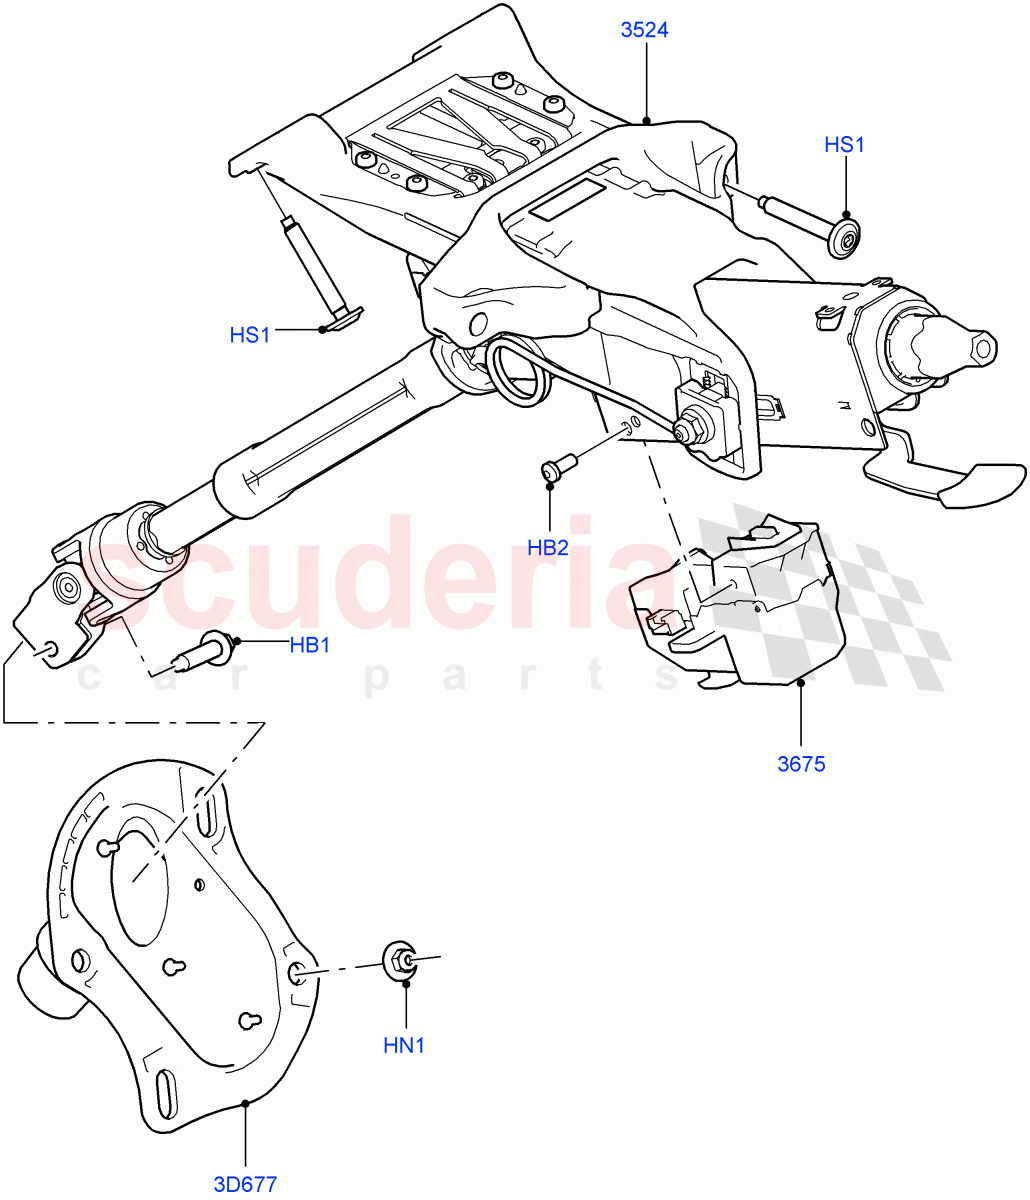 Steering Column(Halewood (UK)) of Land Rover Land Rover Discovery Sport (2015+) [2.2 Single Turbo Diesel]